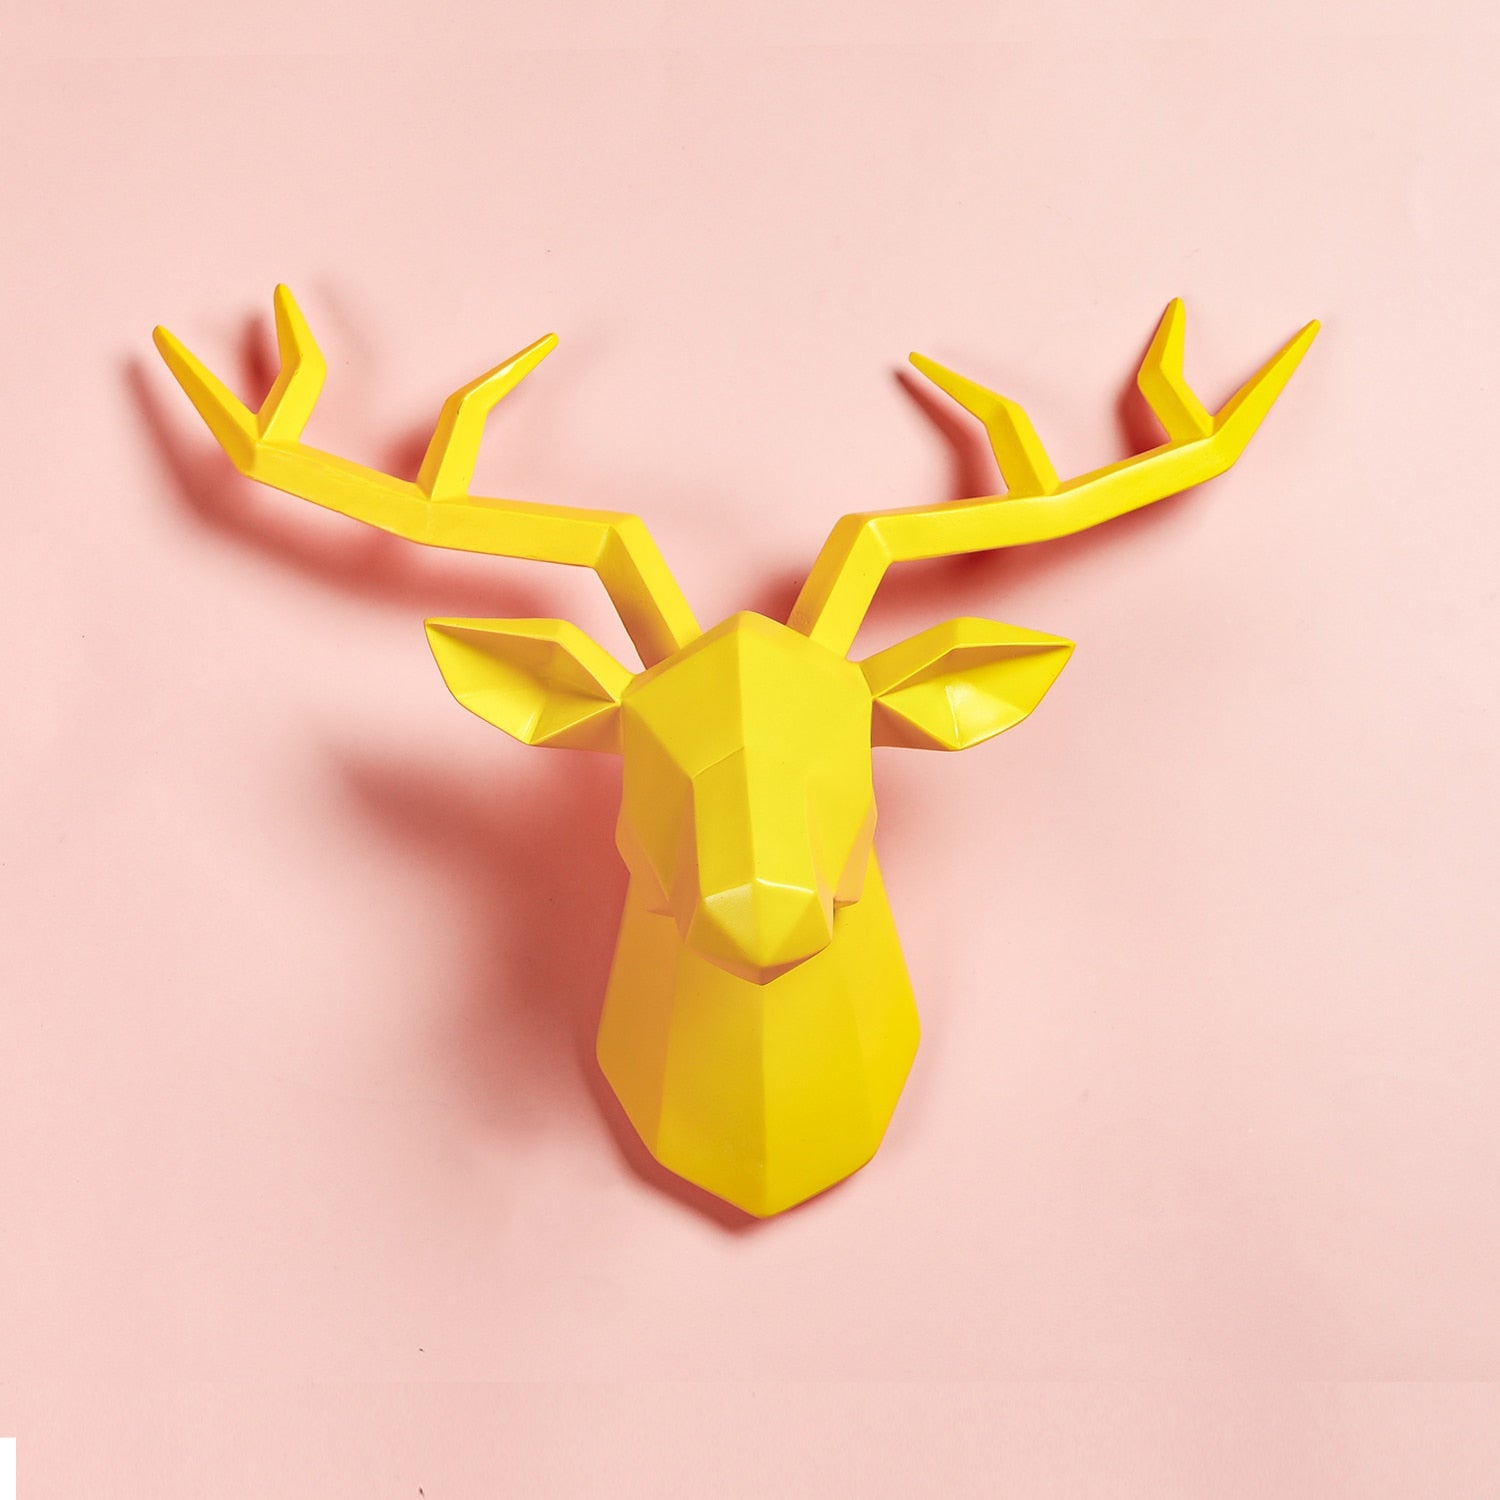 Nordic Deer Head Wall Mounted Golden White Stag Black Antlers Bust 3D Wall Decor For Modern Minimalist Scandinavian Living Room